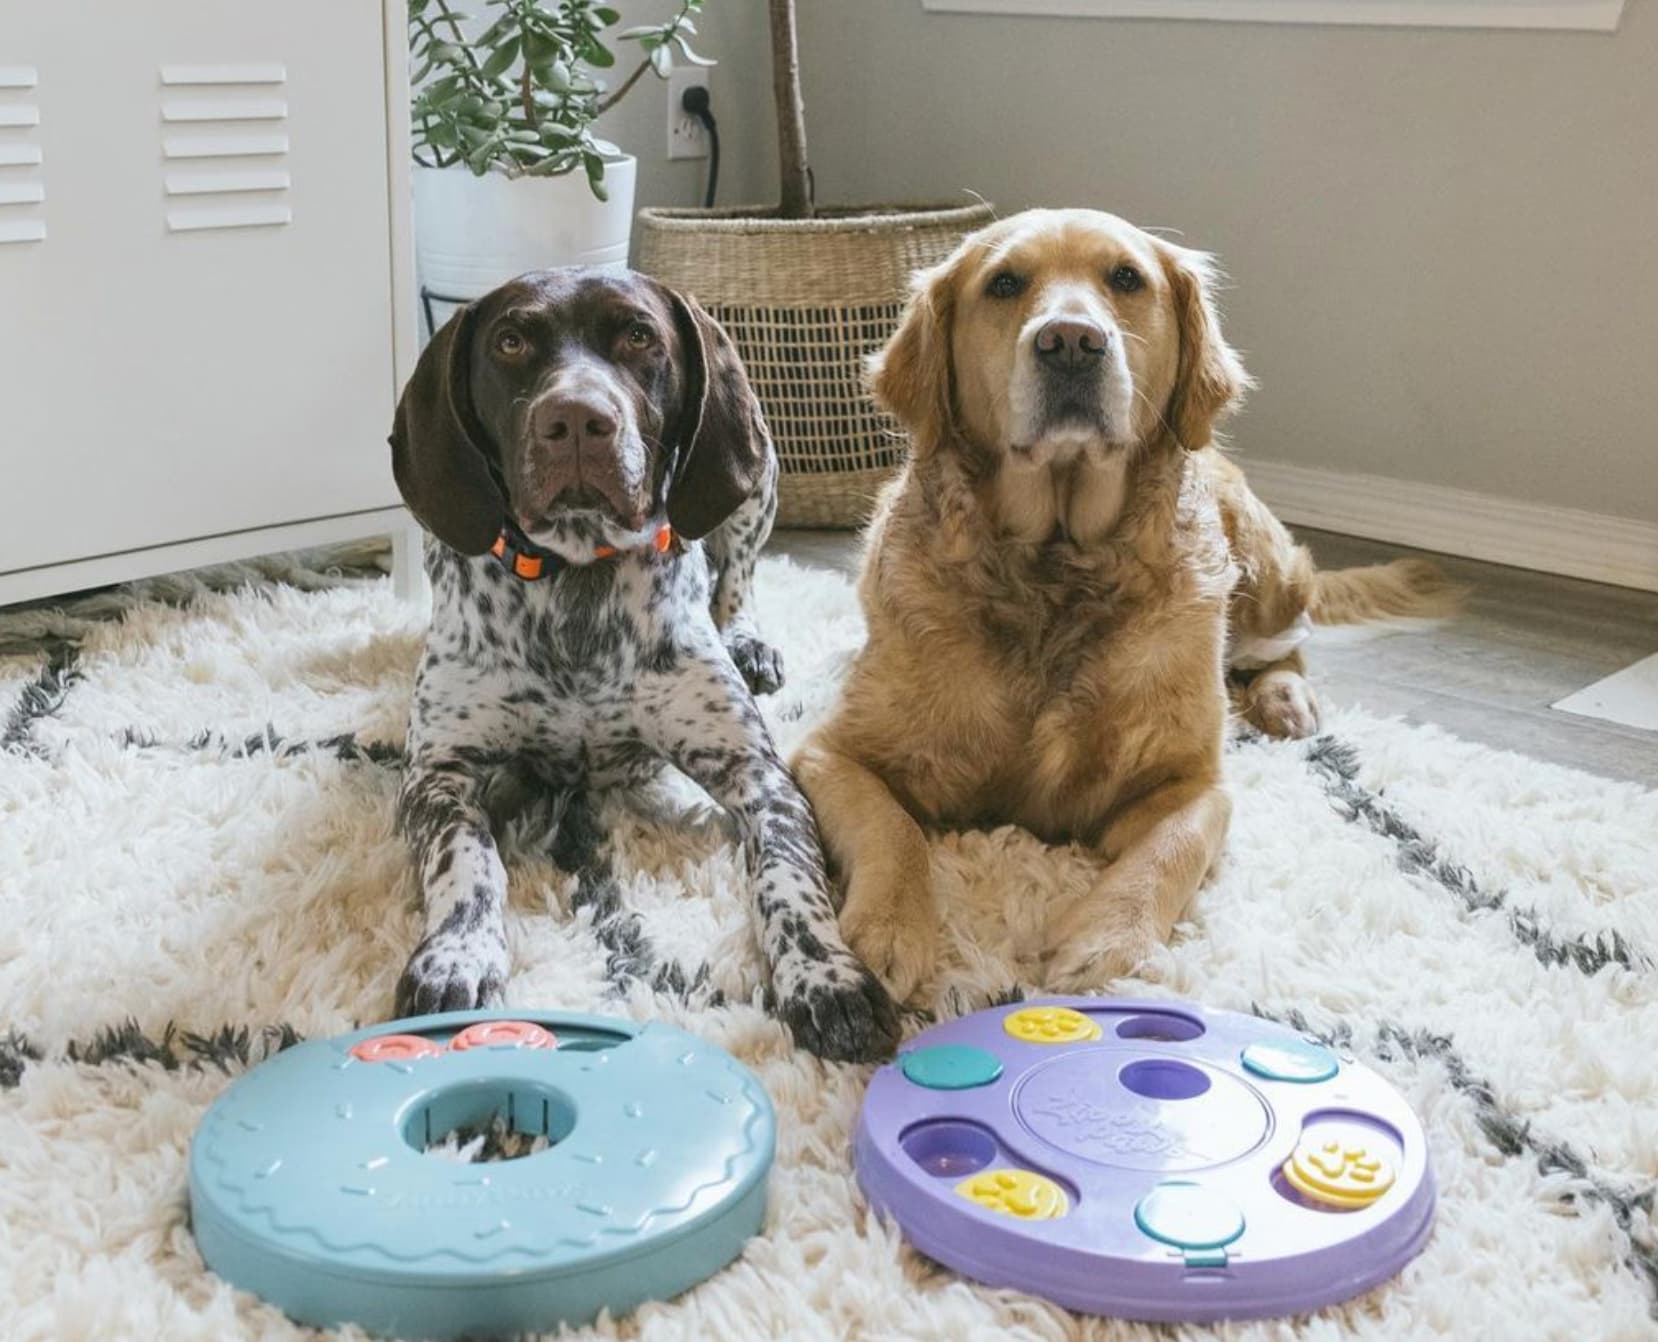 5 Best Interactive Dog Toys to Keep Dogs Entertained When Home Alone